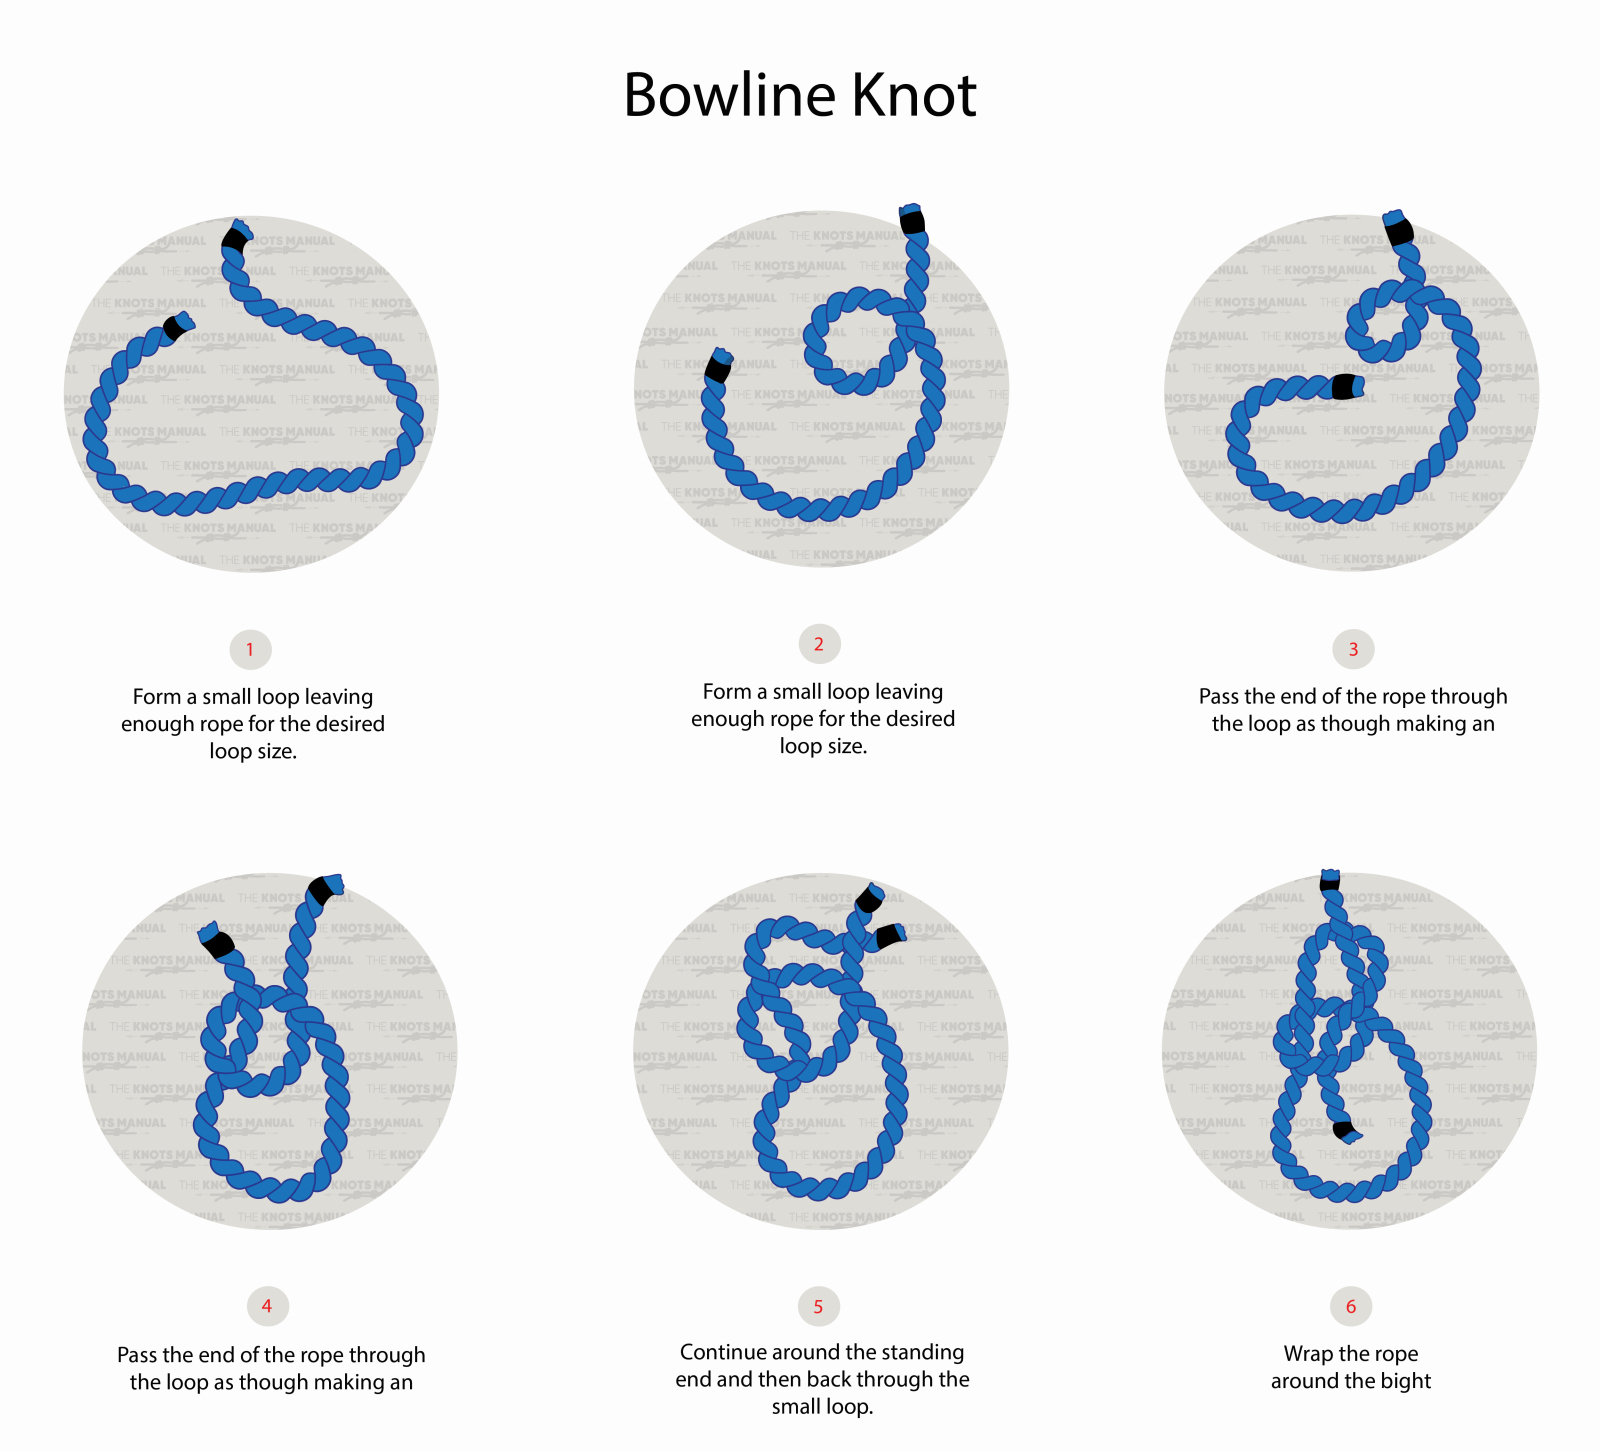 How to Tie a Bowline Knot (A Quick, Illustrated Guide)